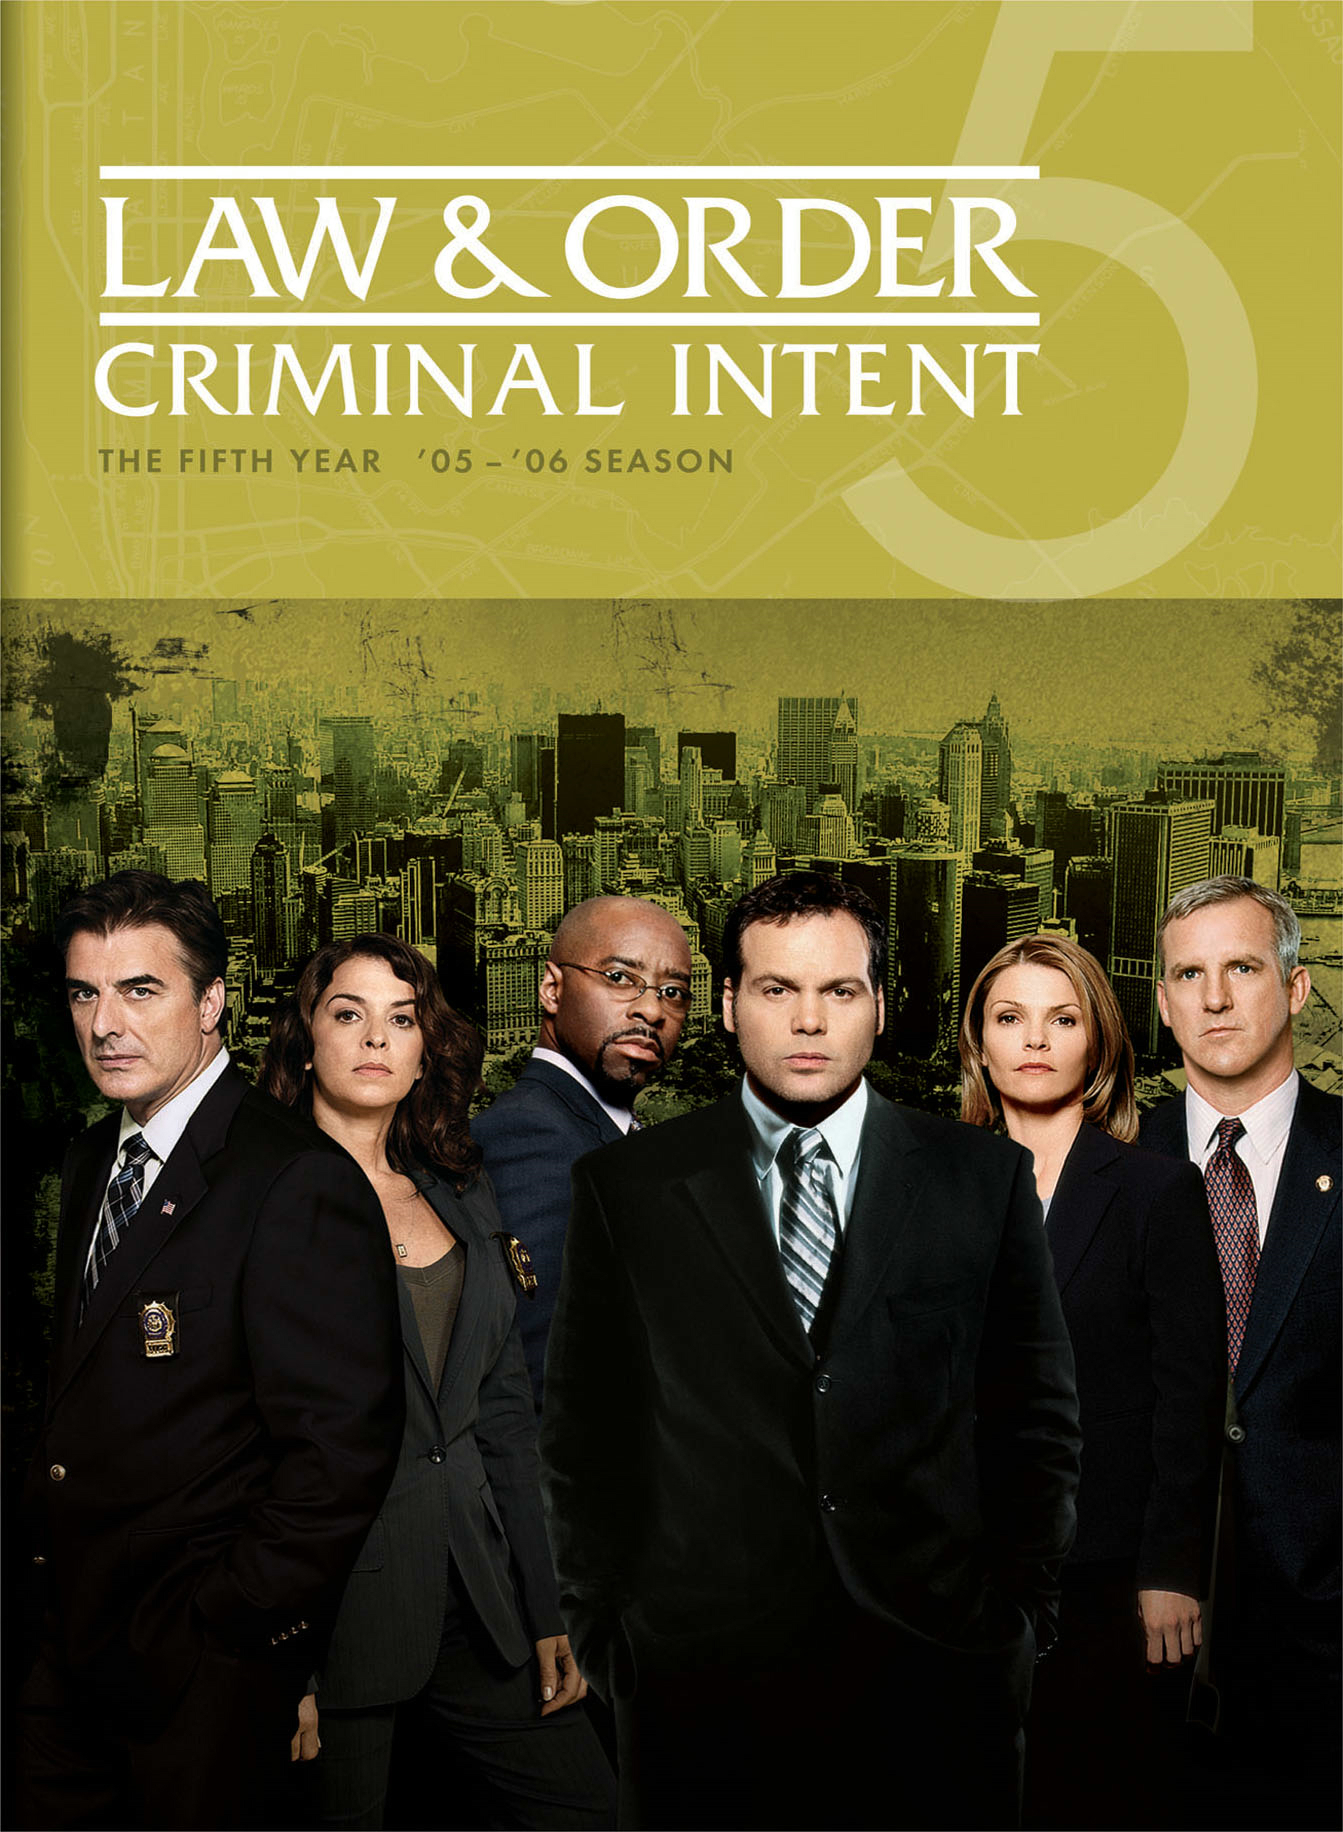 Law & Order - Criminal Intent: The Fifth Year - DVD   - Drama Television On DVD - TV Shows On GRUV